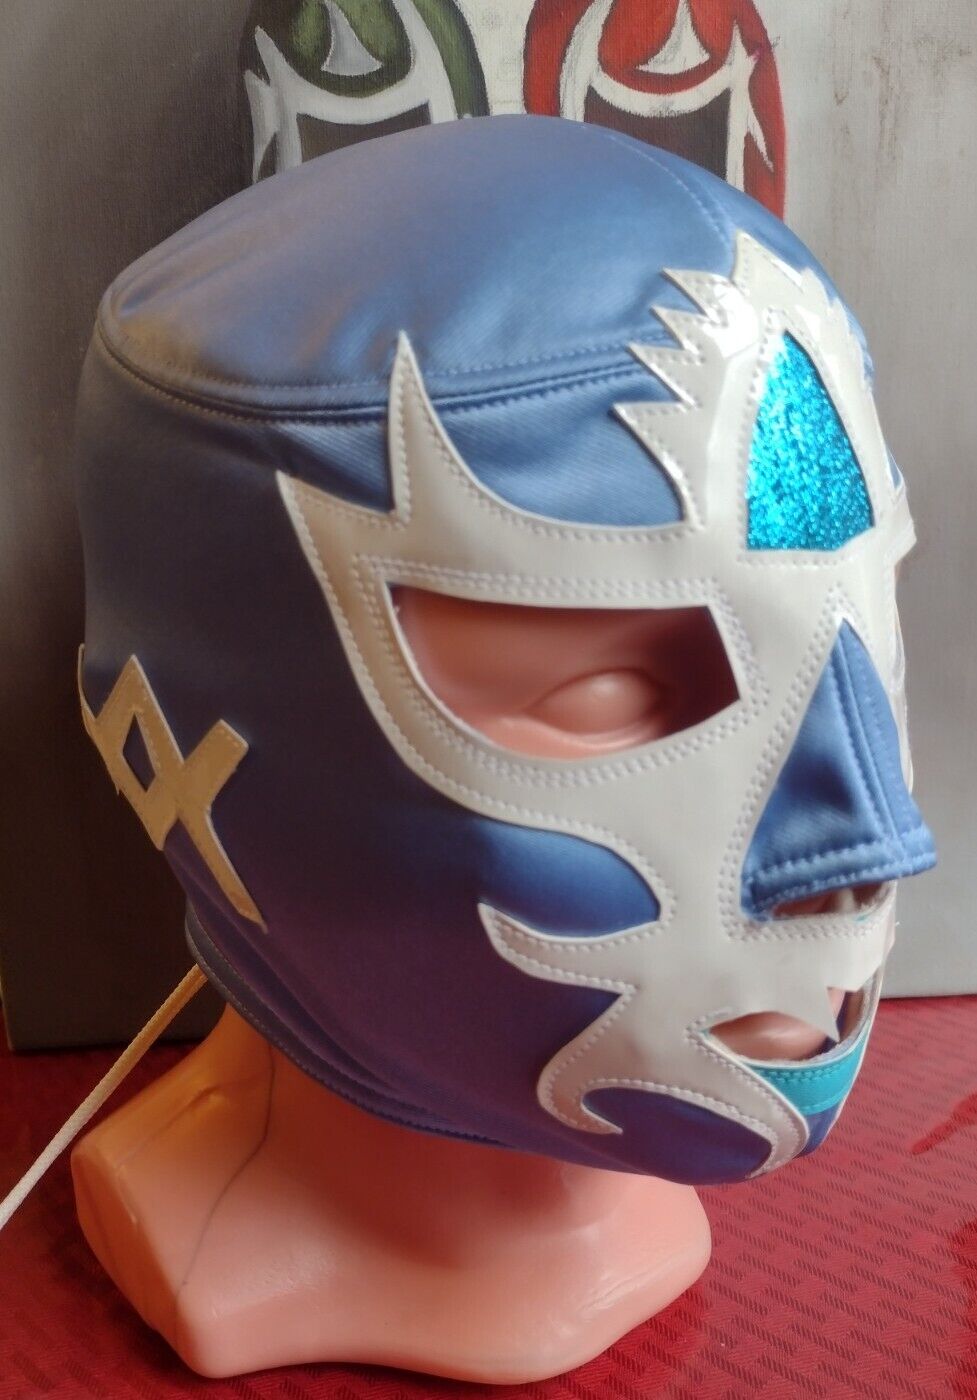 Mil Máscaras Mexican Profesional Mask in Sport Pet Light Blue and White Vinil.